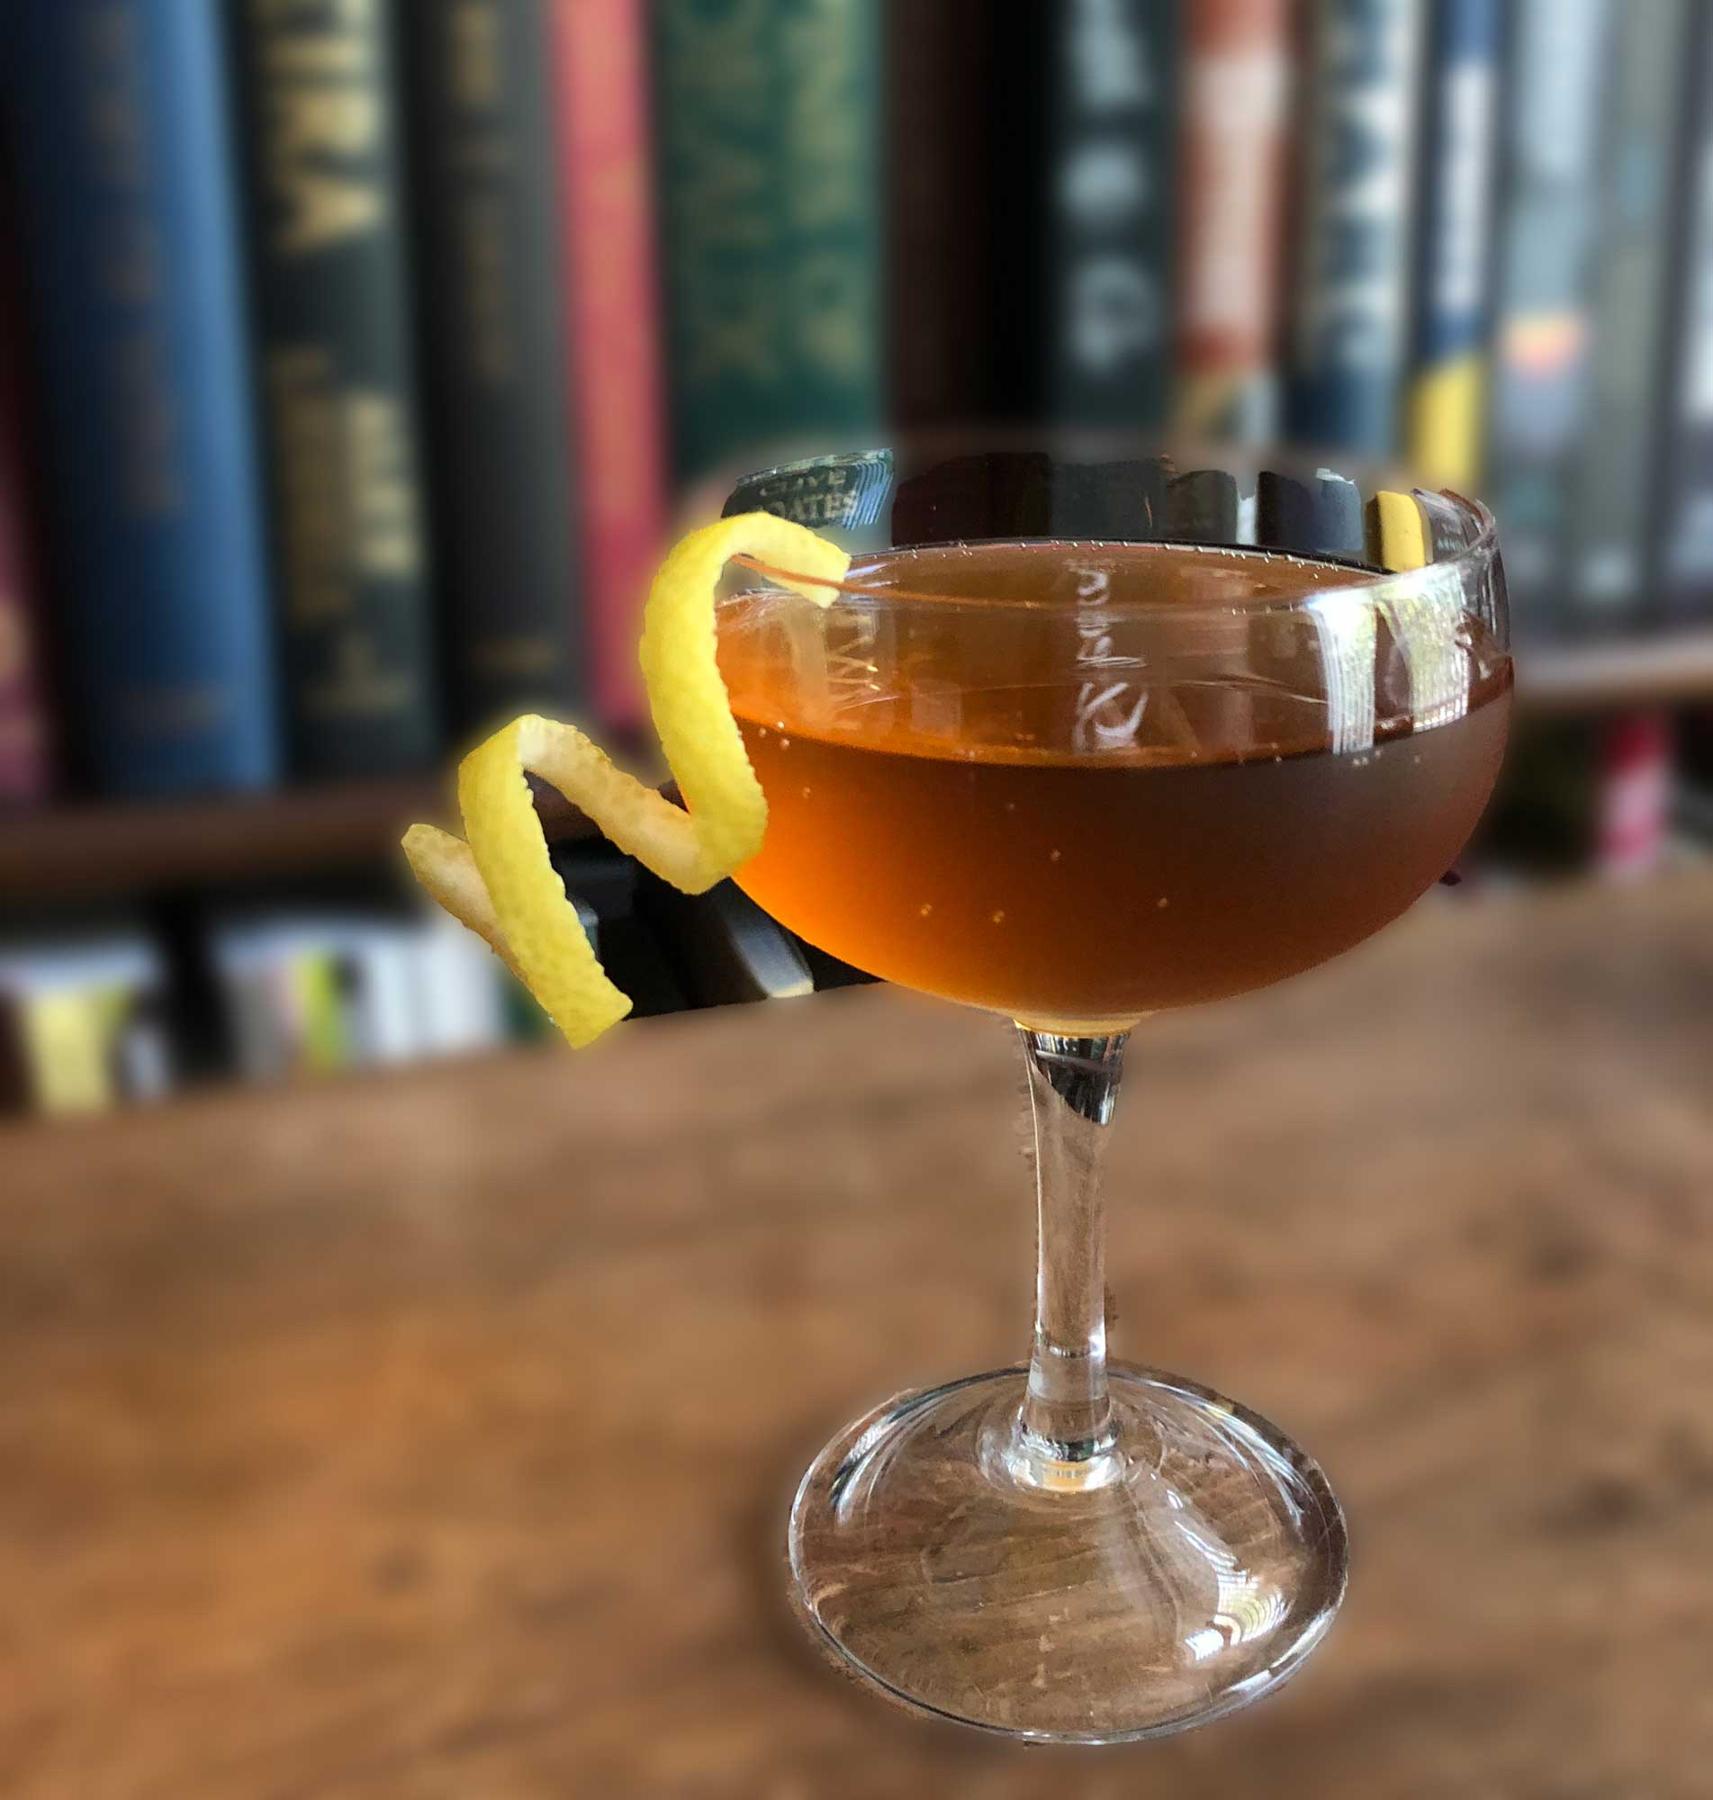 An example of the Familia Cocktail, the mixed drink (drink) featuring Cocchi Asti DOCG, Cardamaro Vino Amaro, and lemon twist; photo by Lee Edwards